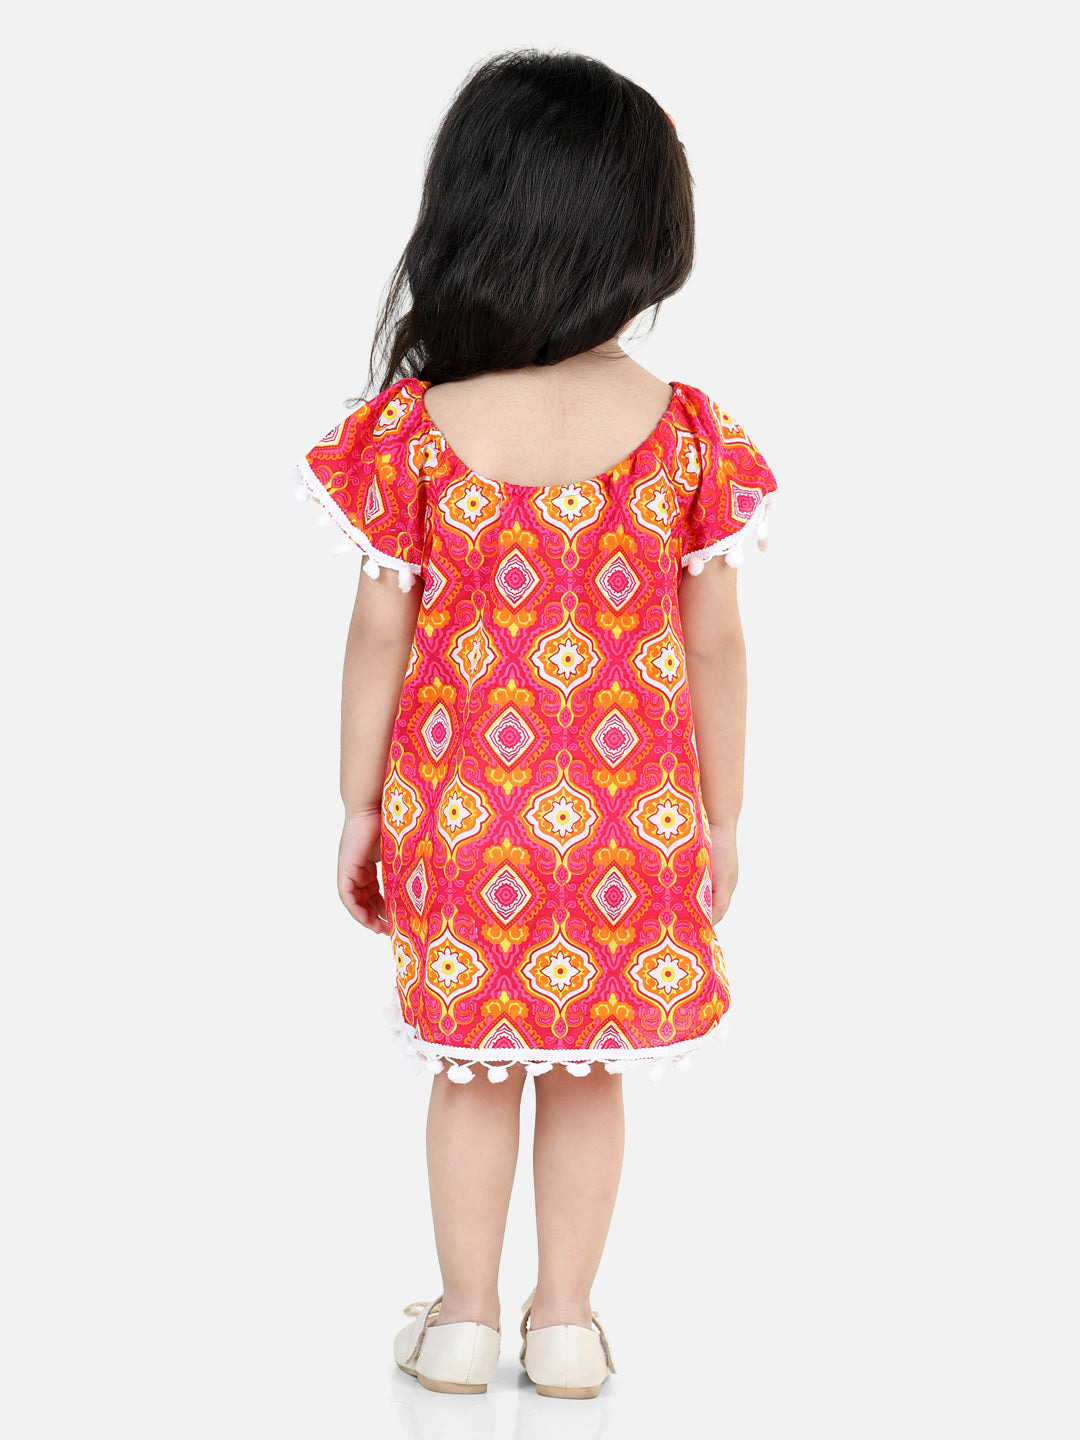 BownBee 100% Cotton Printed with Pompom Jhabla Frock for Girls- Pink